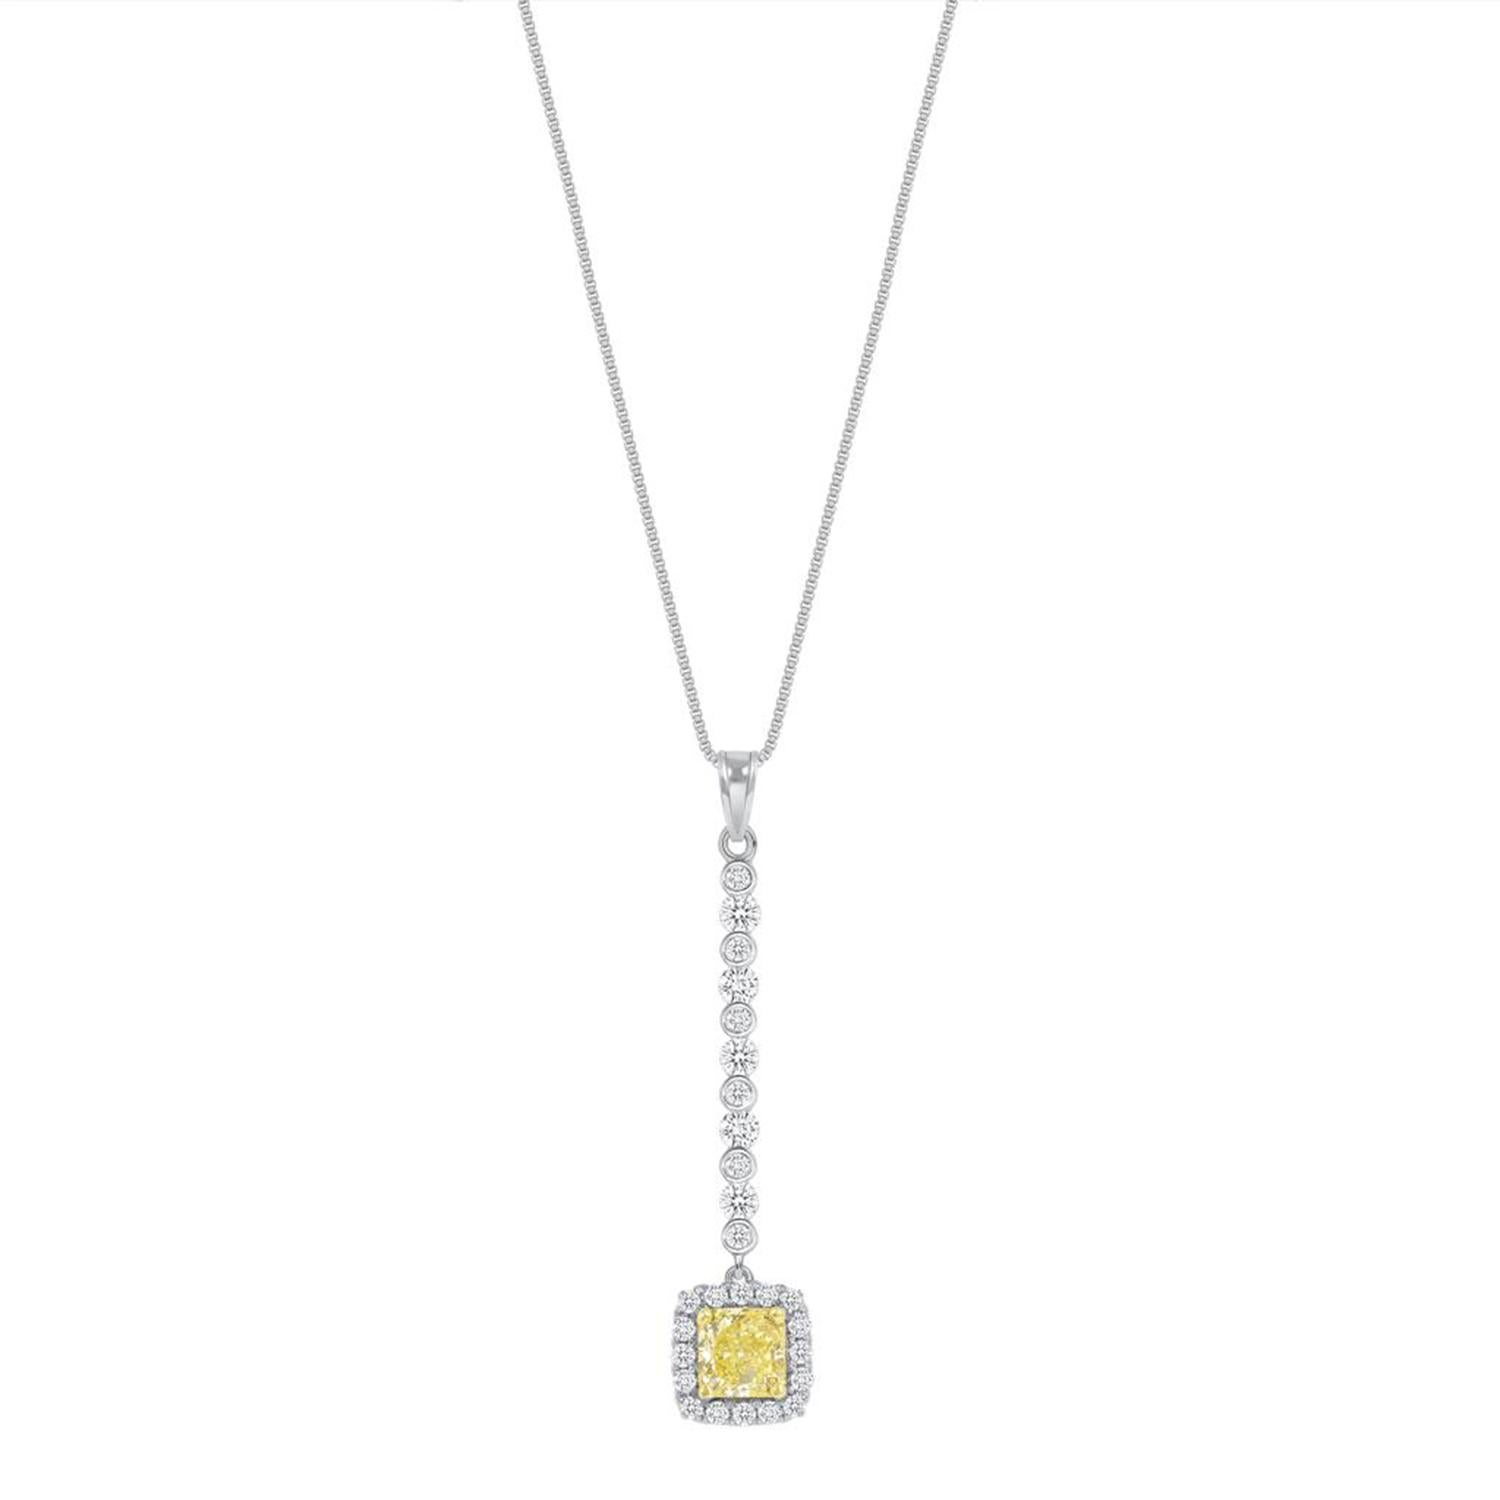 1.79 Carat Yellow and White Diamonds 18k White Gold Drop Necklace In Excellent Condition For Sale In Los Angeles, CA